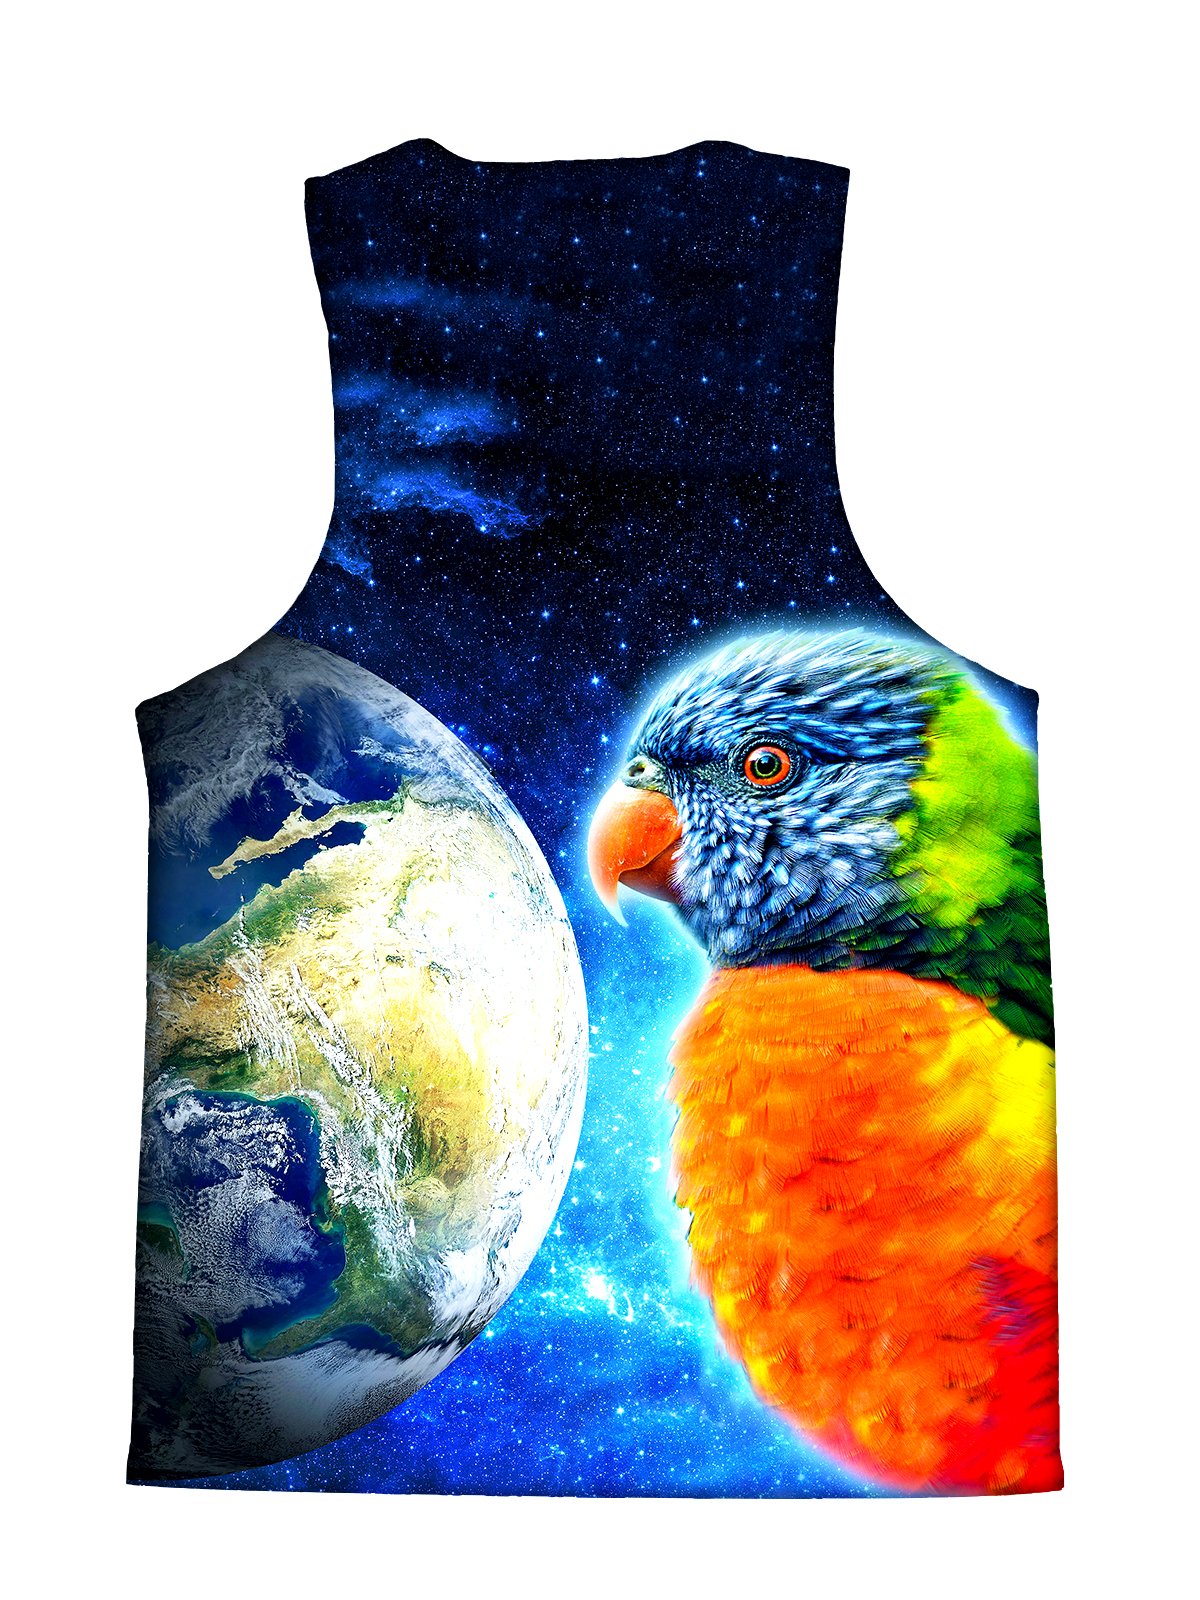 Psychedelic all over print space animal tank by GratefullyDyed Apparel back view.